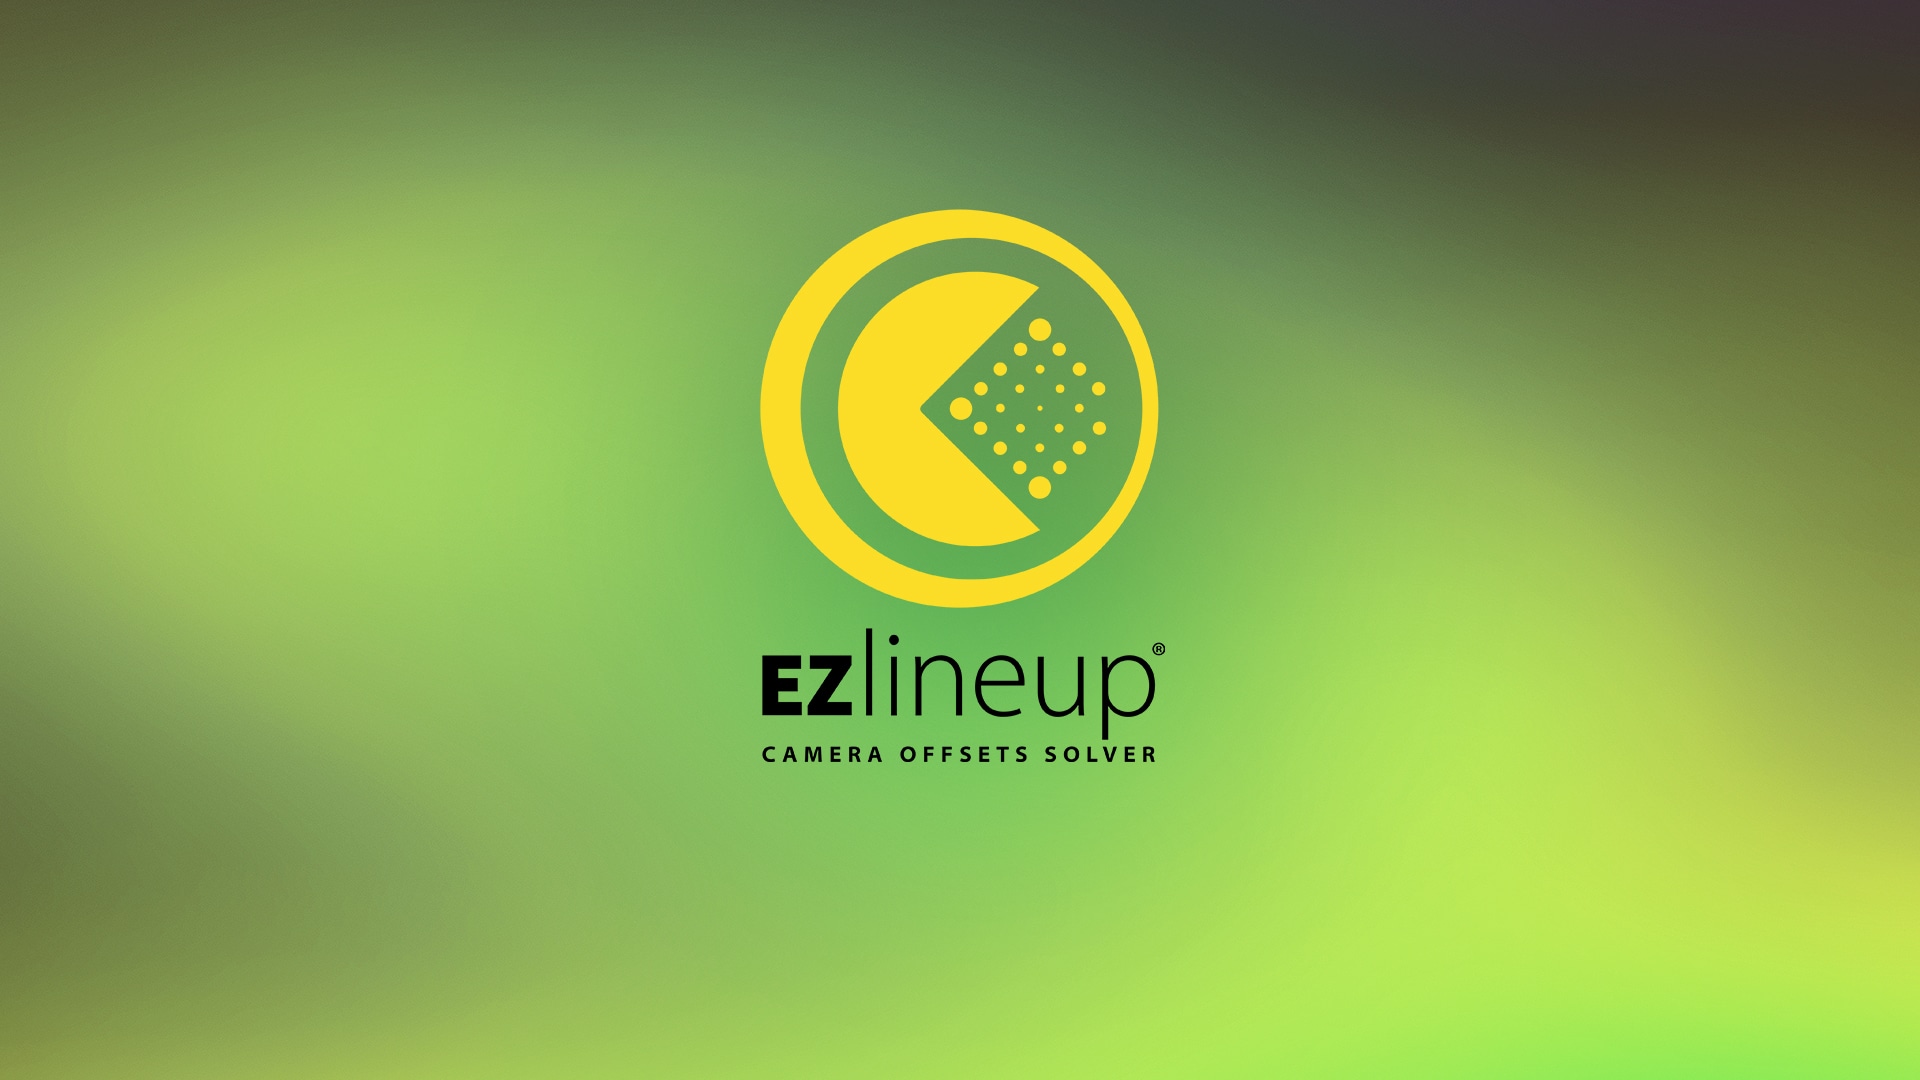 Introducing EZlineup®: our universal camera offsets solver for all virtual stages!